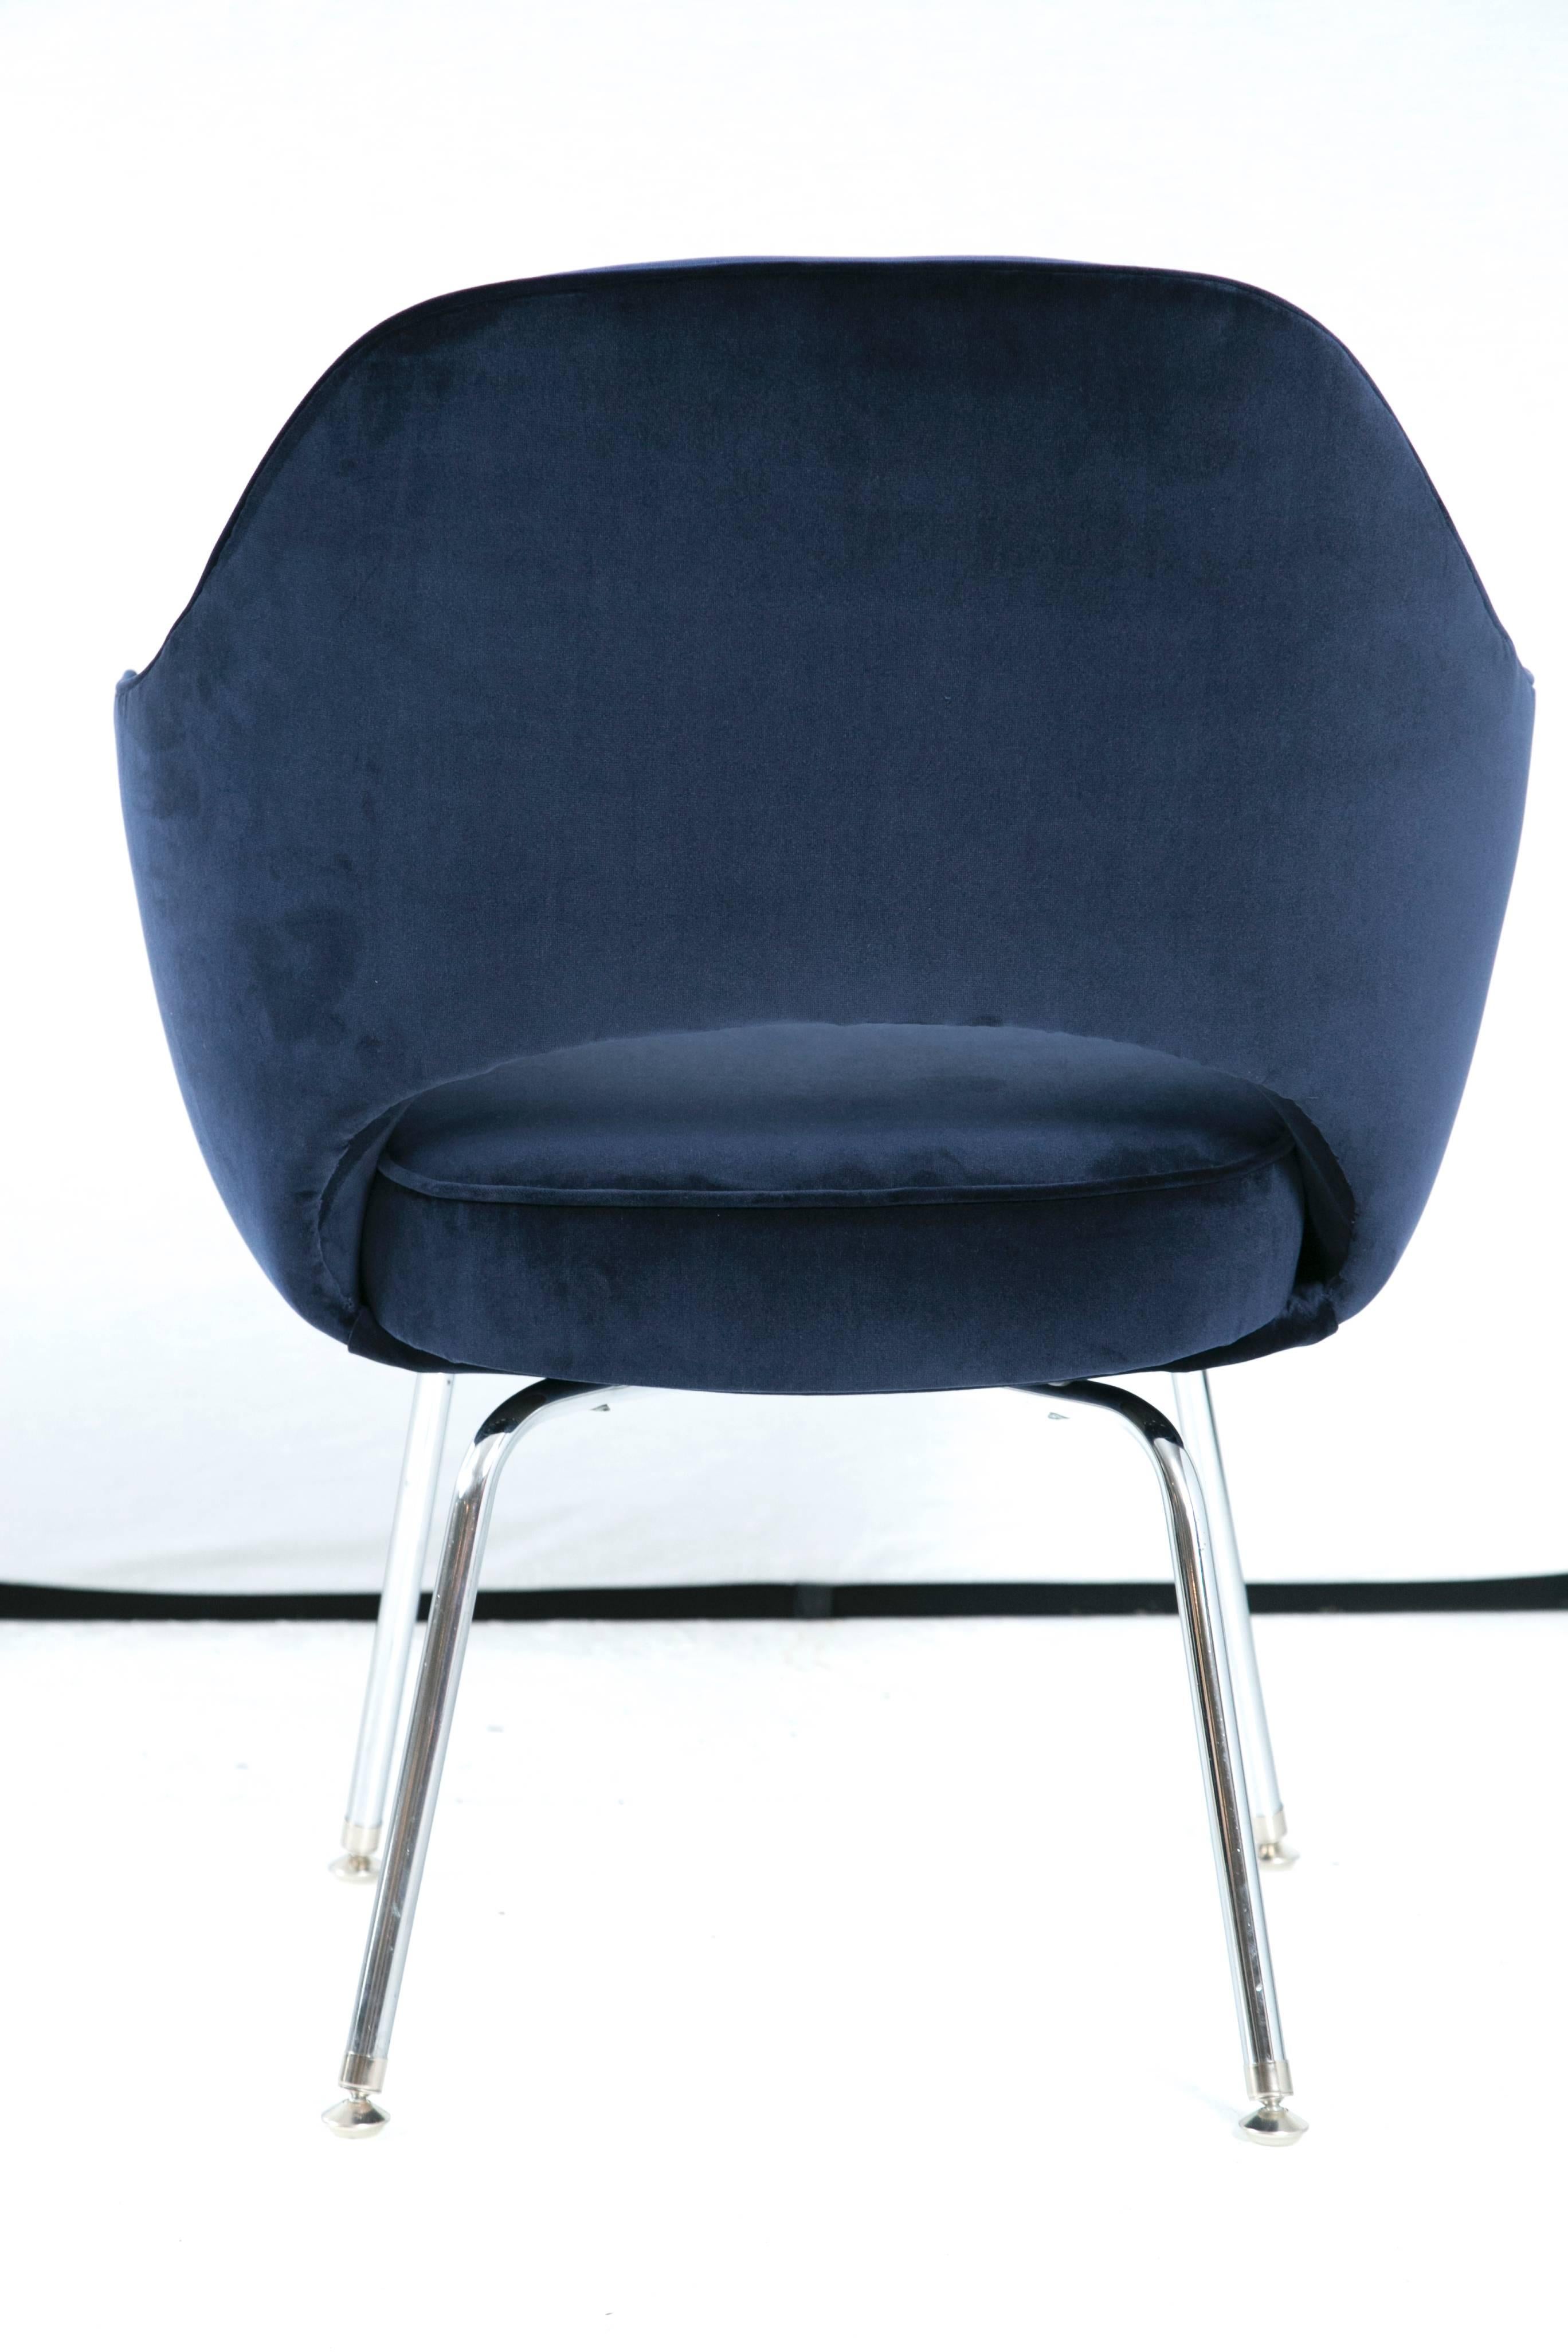 Saarinen for Knoll Executive Arm Chairs in Navy Velvet, Chrome Tubular Legs In Excellent Condition For Sale In Wilton, CT